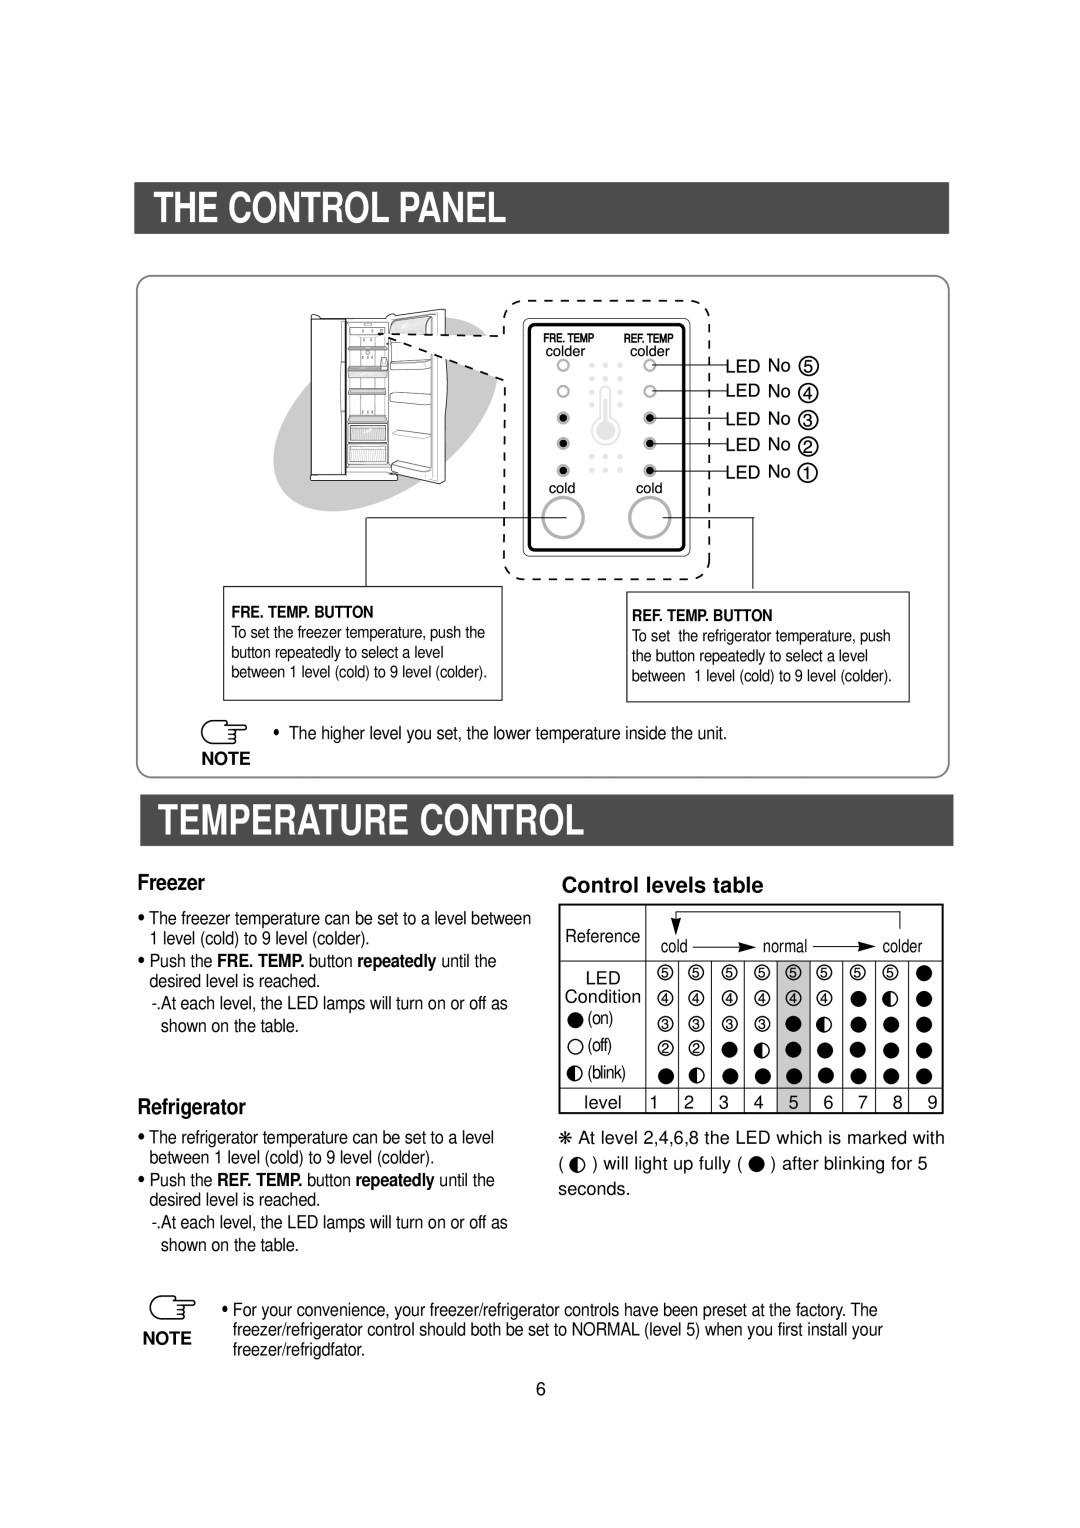 Samsung SRS536NP owner manual Temperature Control, Freezer, Refrigerator, Control levels table, The Control Panel 